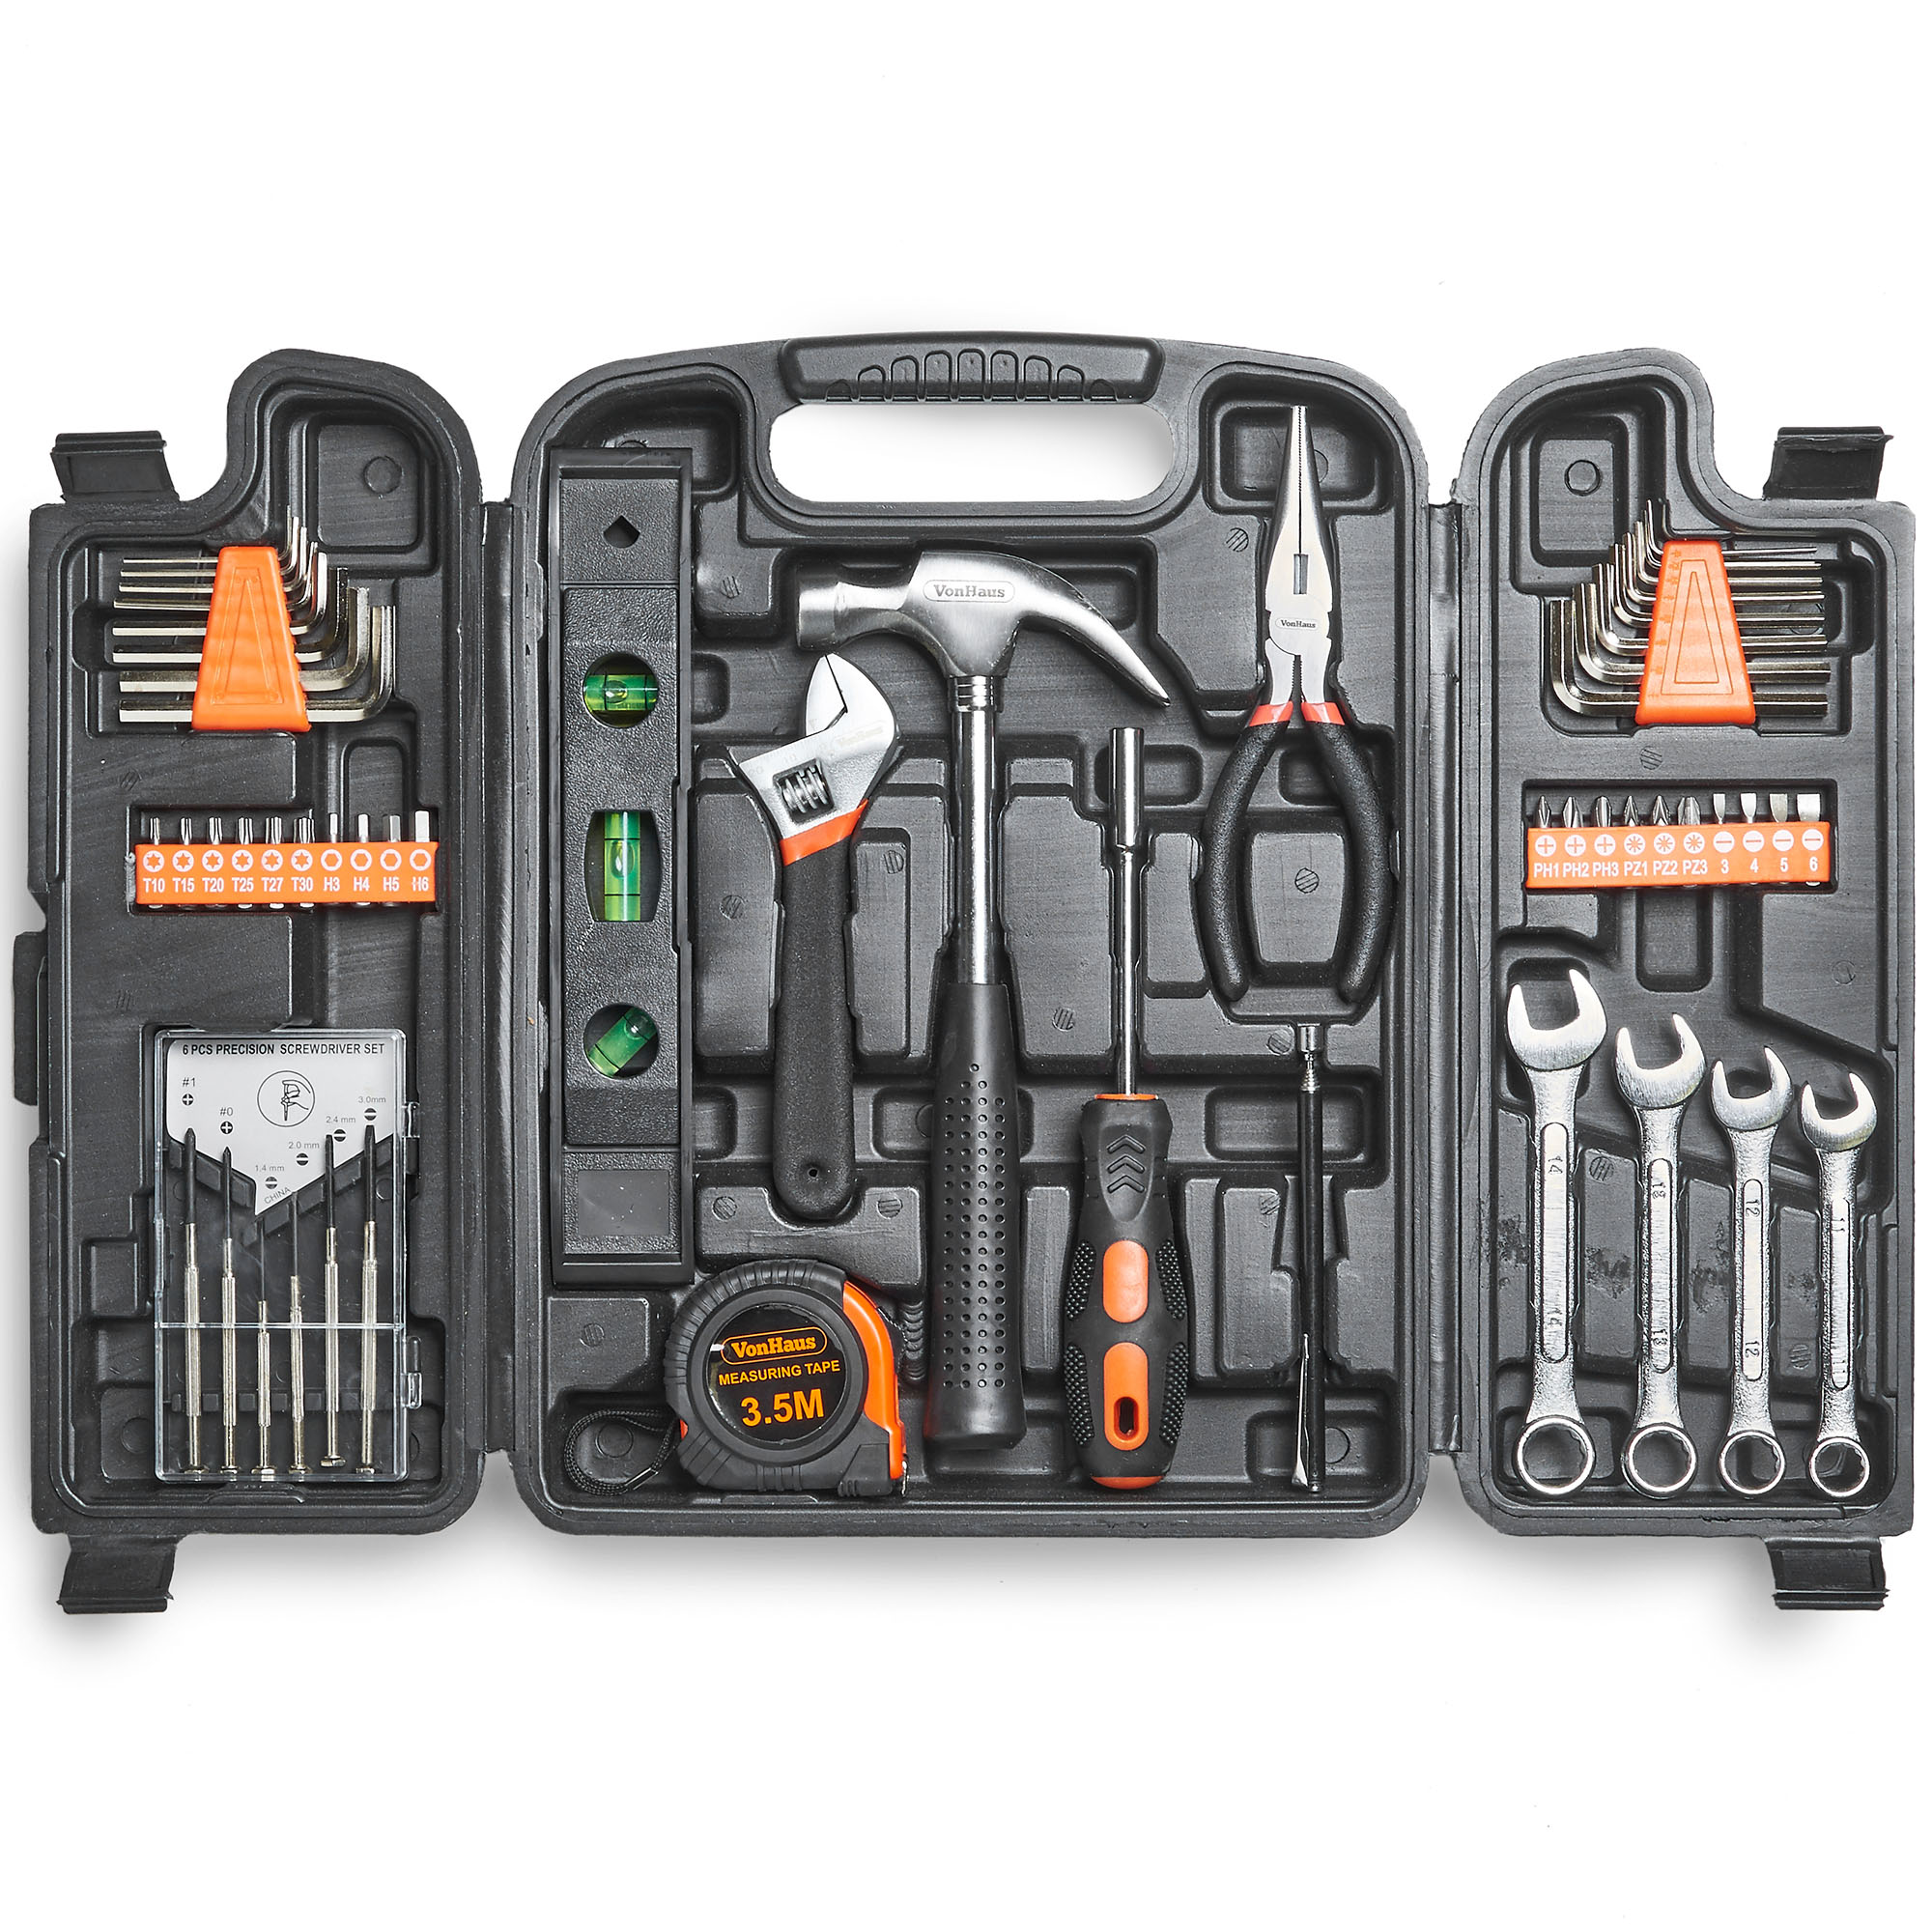 VonHaus-53pc-Household-Tools-Set-Tools-Kit-Hardwearing-Steel-Feature-Soft-grip-Moulded-Handles-Tools-1761809-1